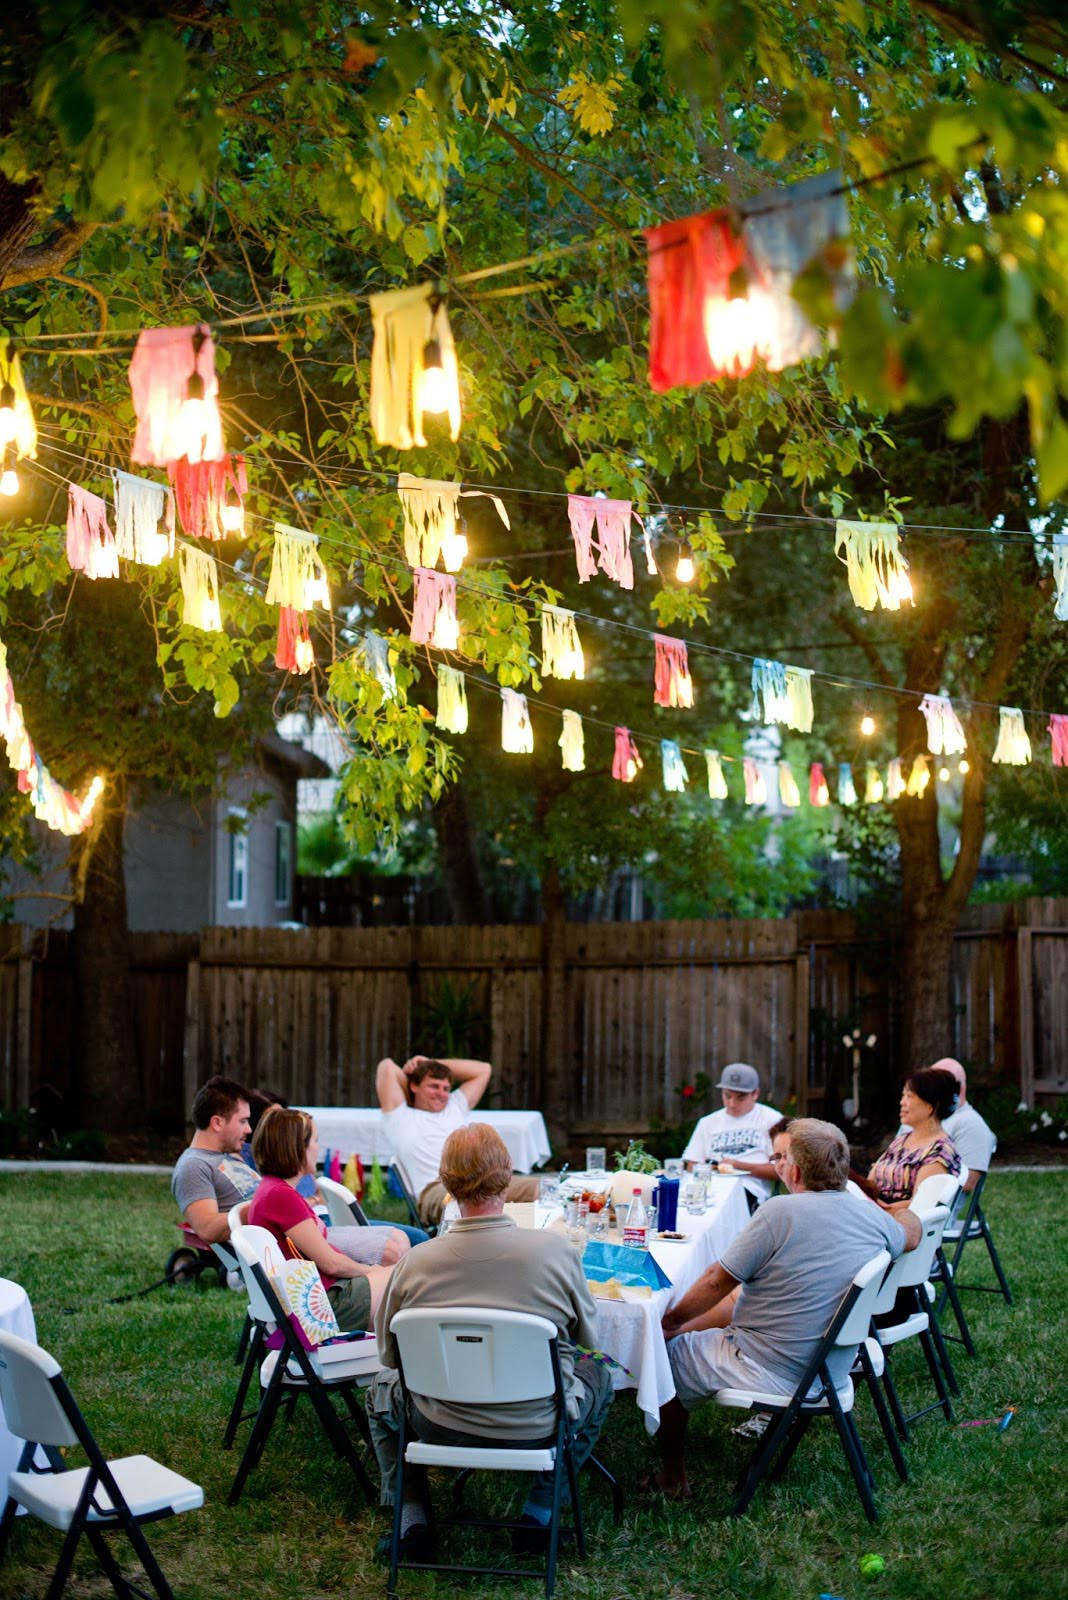 Backyard Party Lights Ideas
 Some Creative Outdoor Party Games